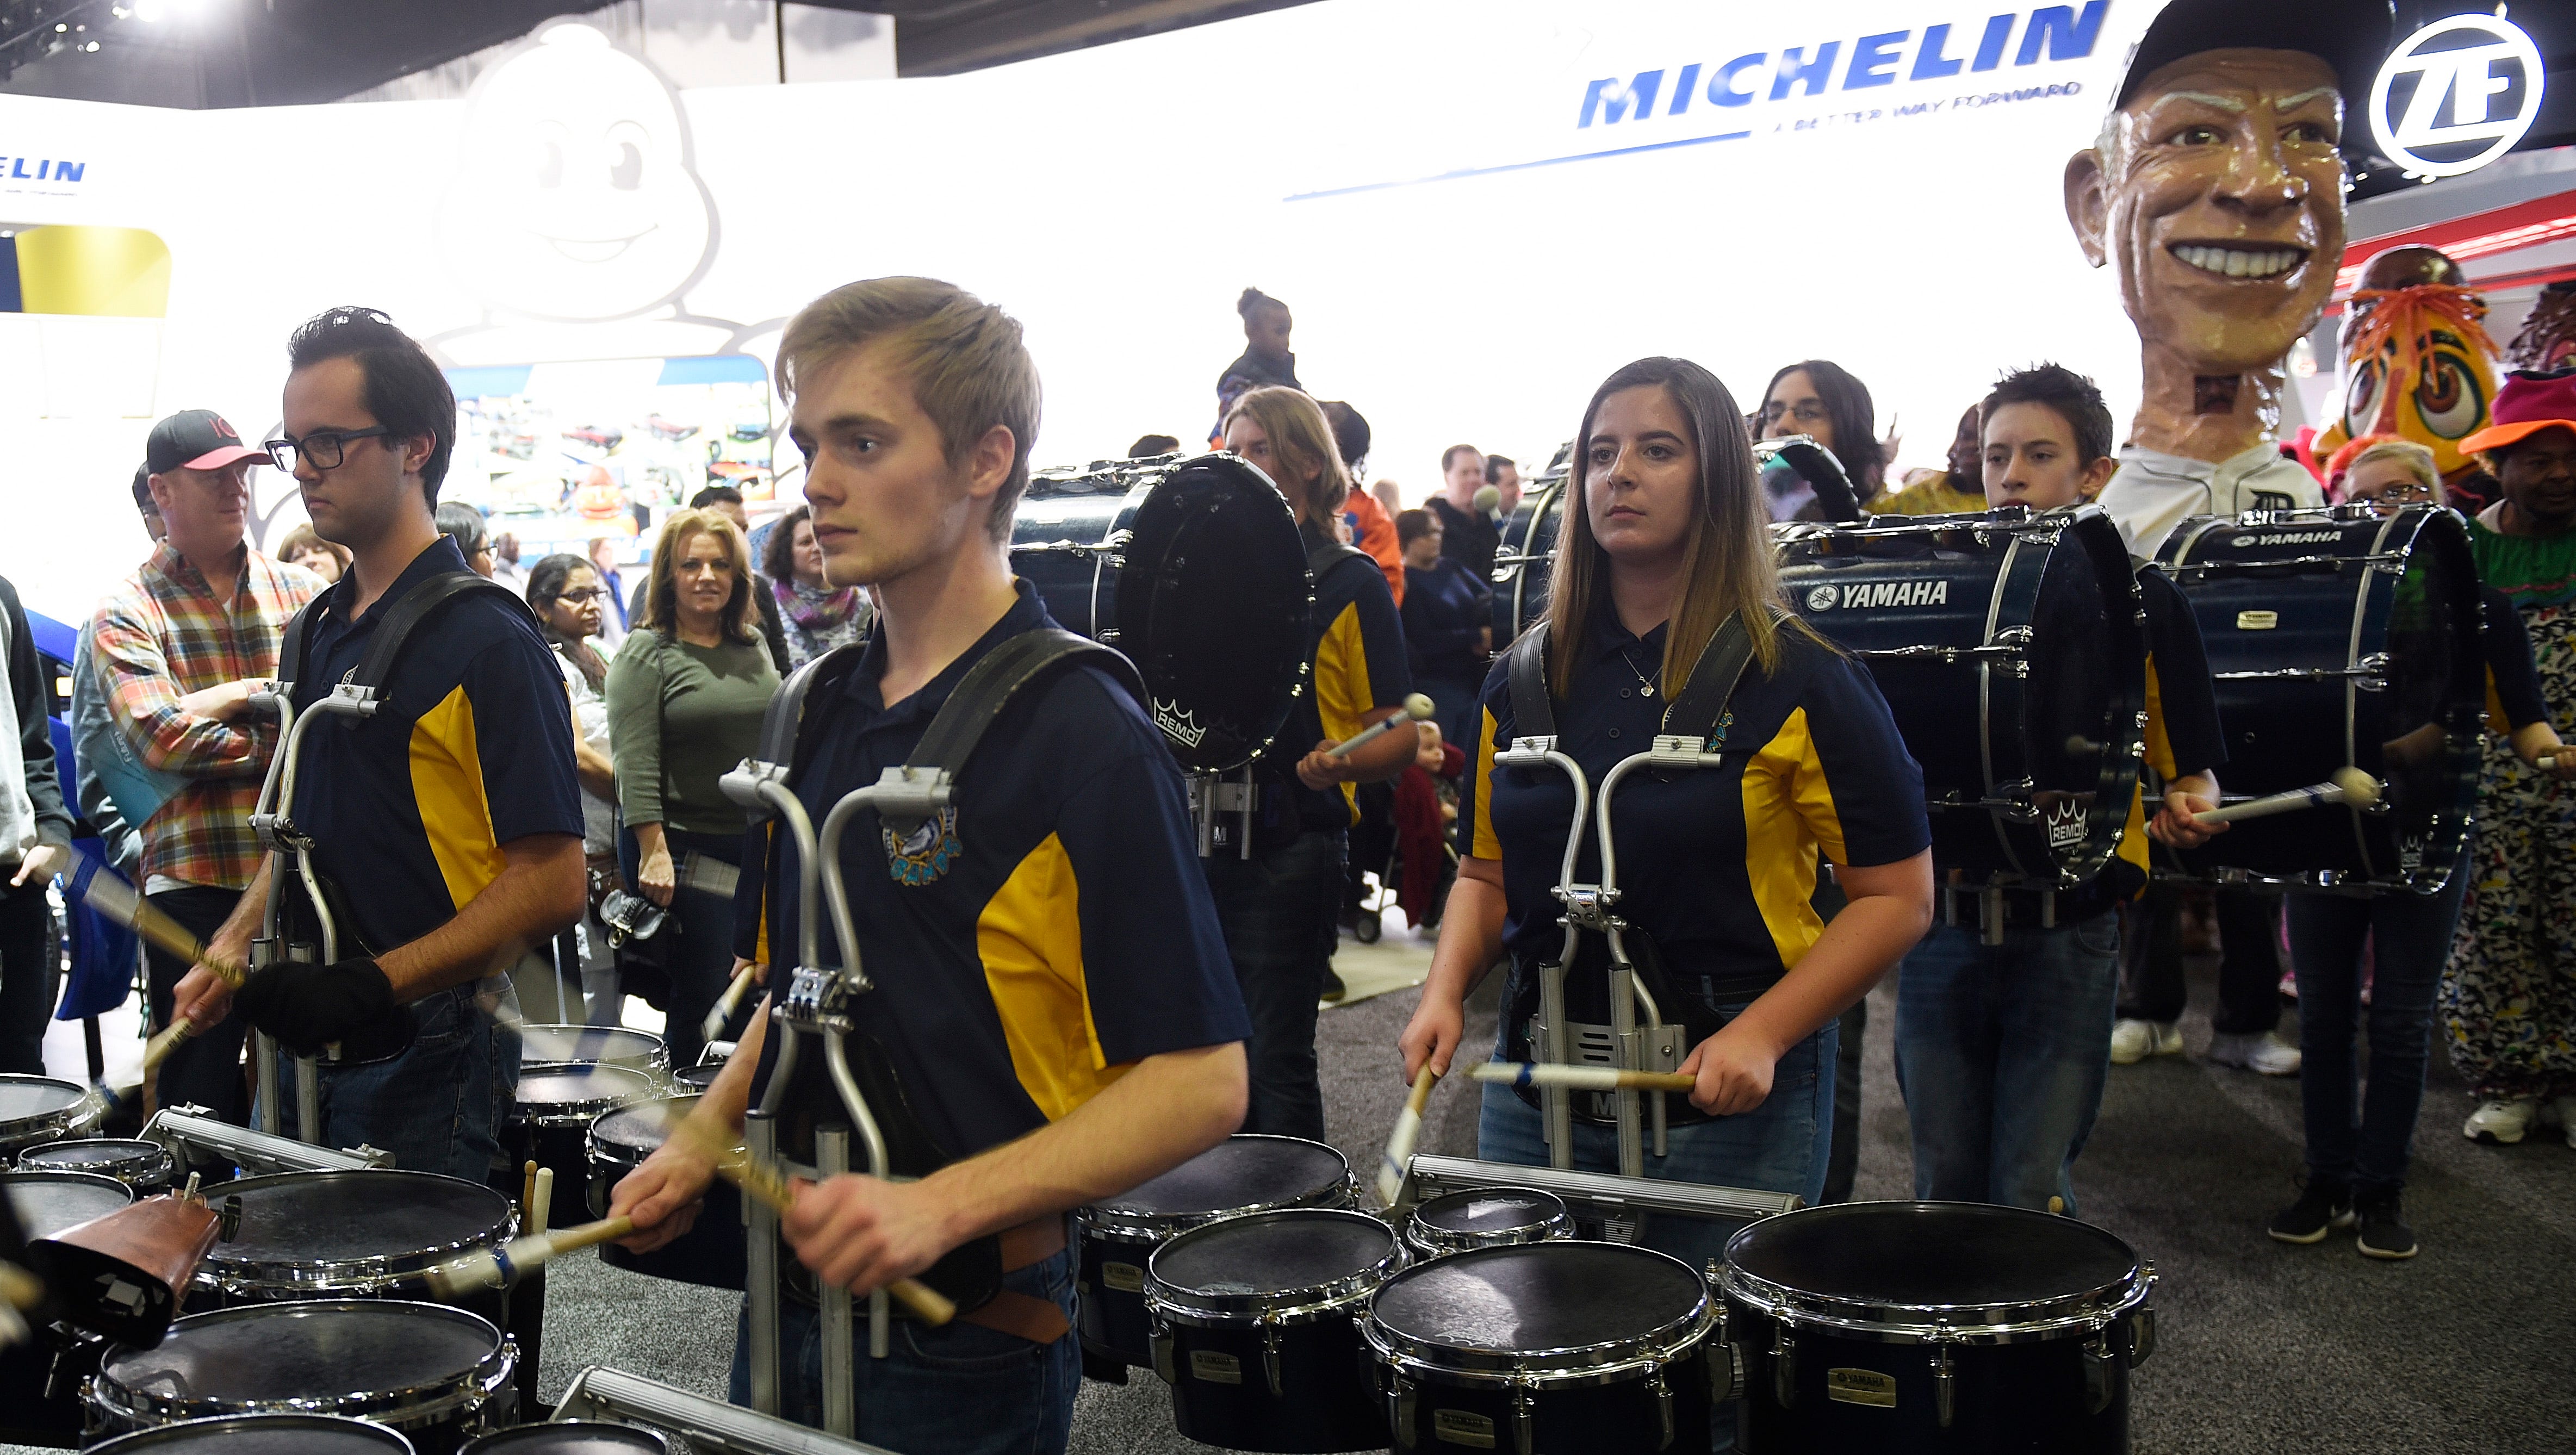 Members of the Port Huron Northern High School Drumline participated in the Parade of Cars.